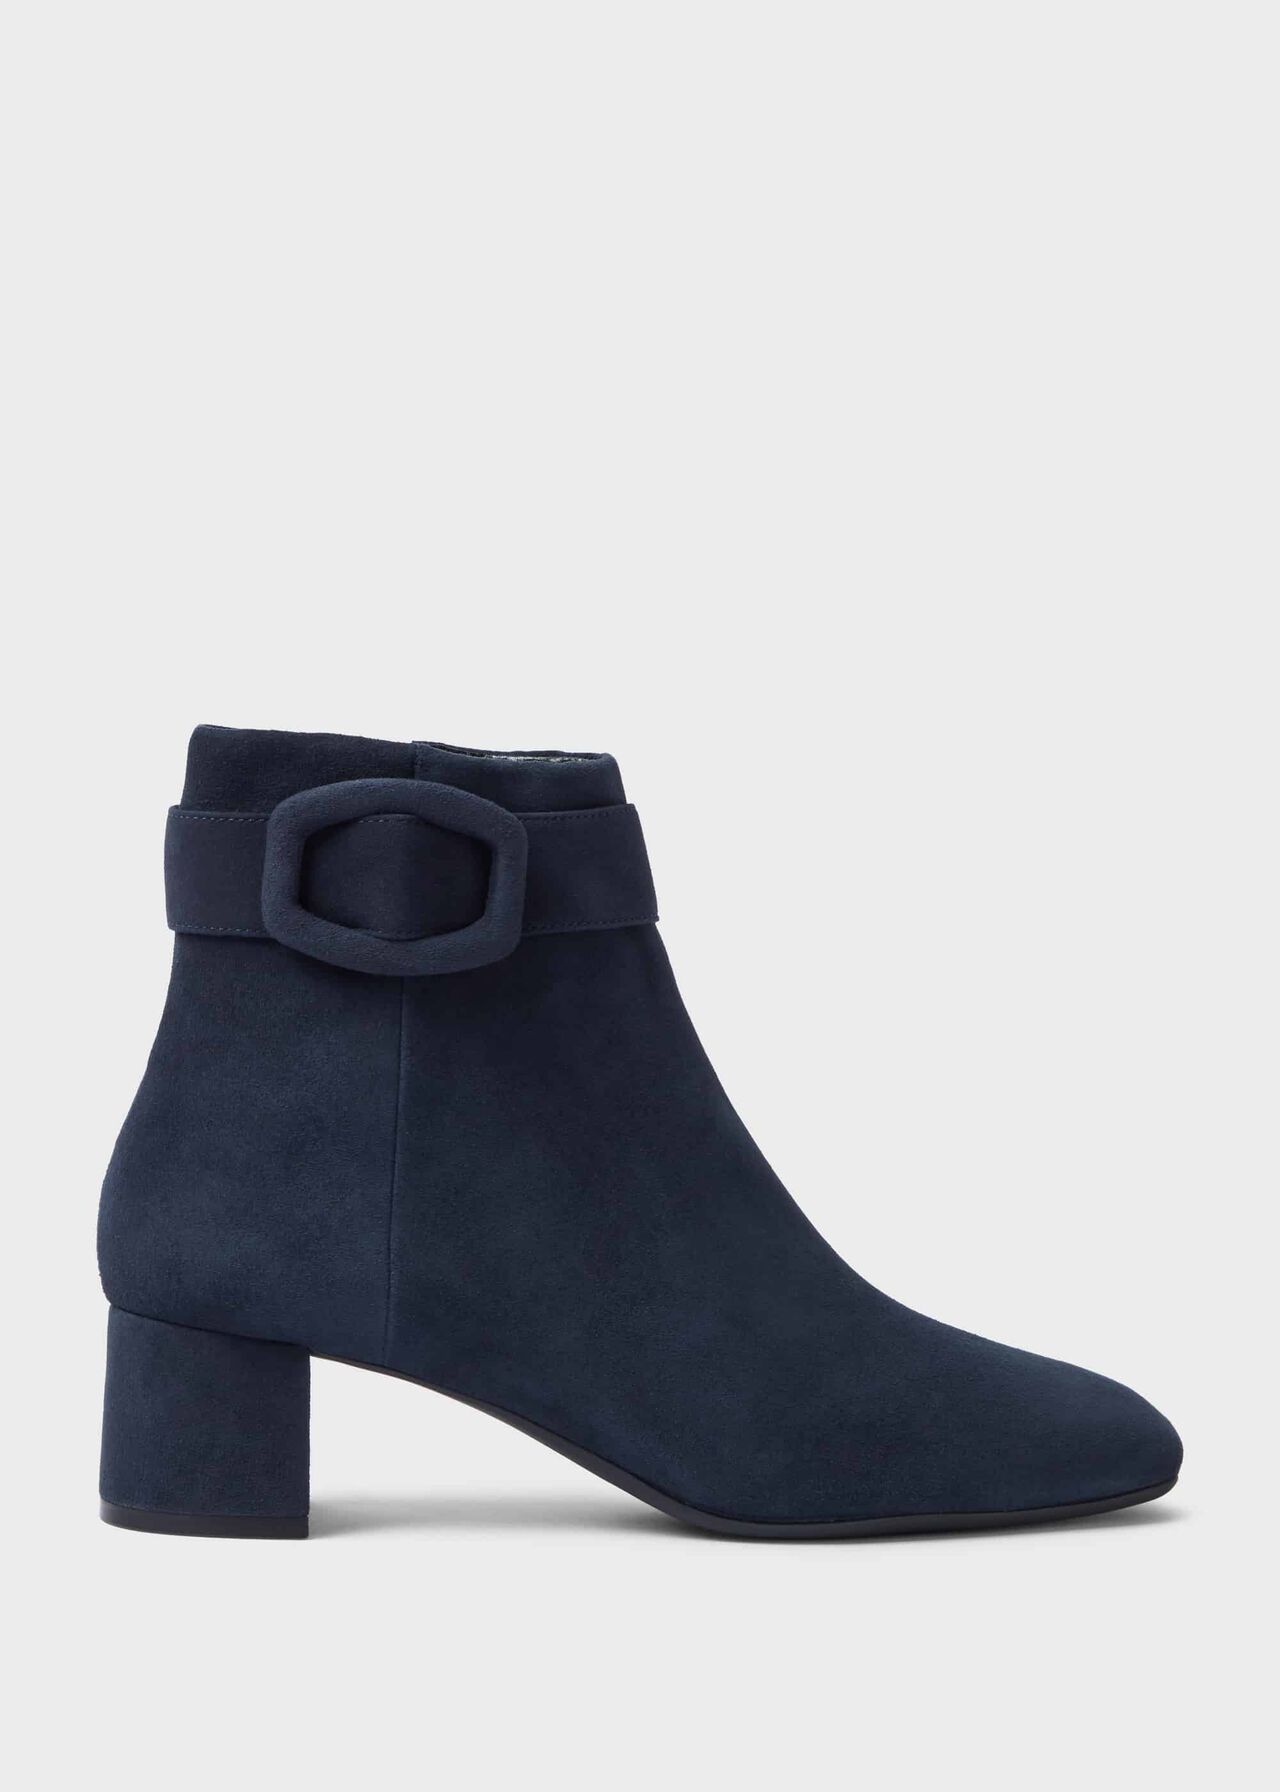 Hailey Ankle Boots, Navy, hi-res